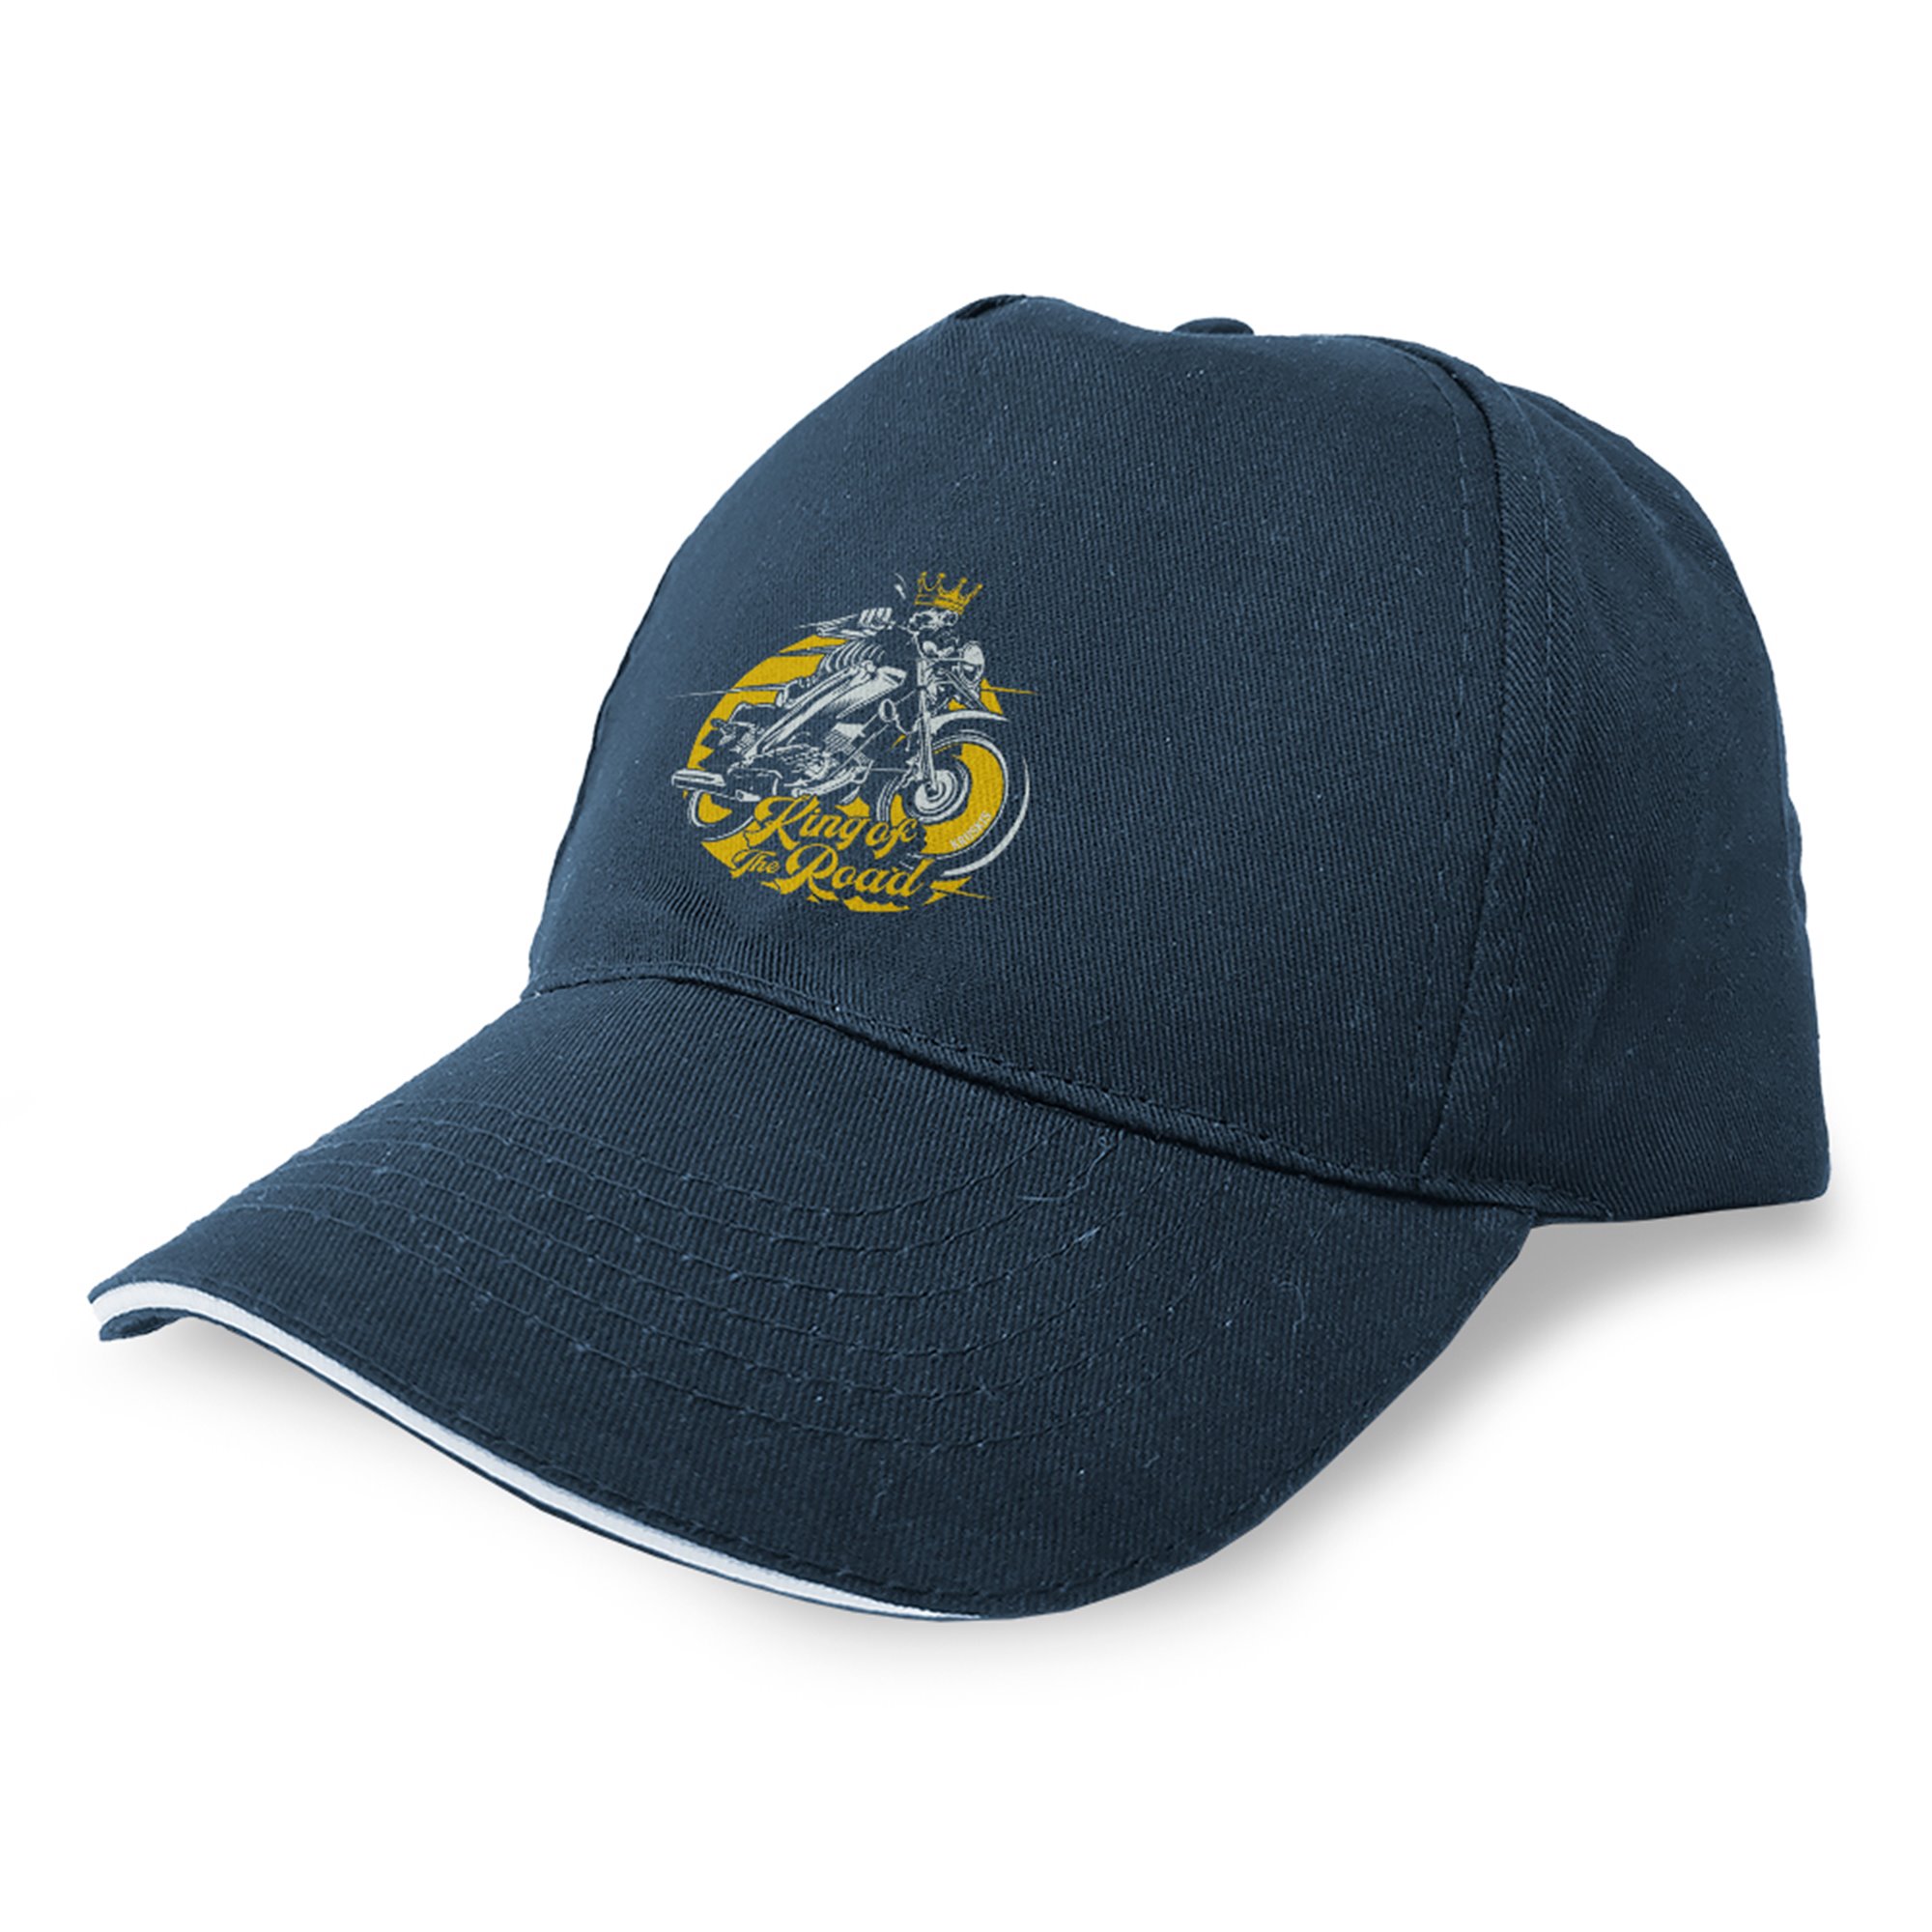 Cap Motociclismo King of the Road Unisex